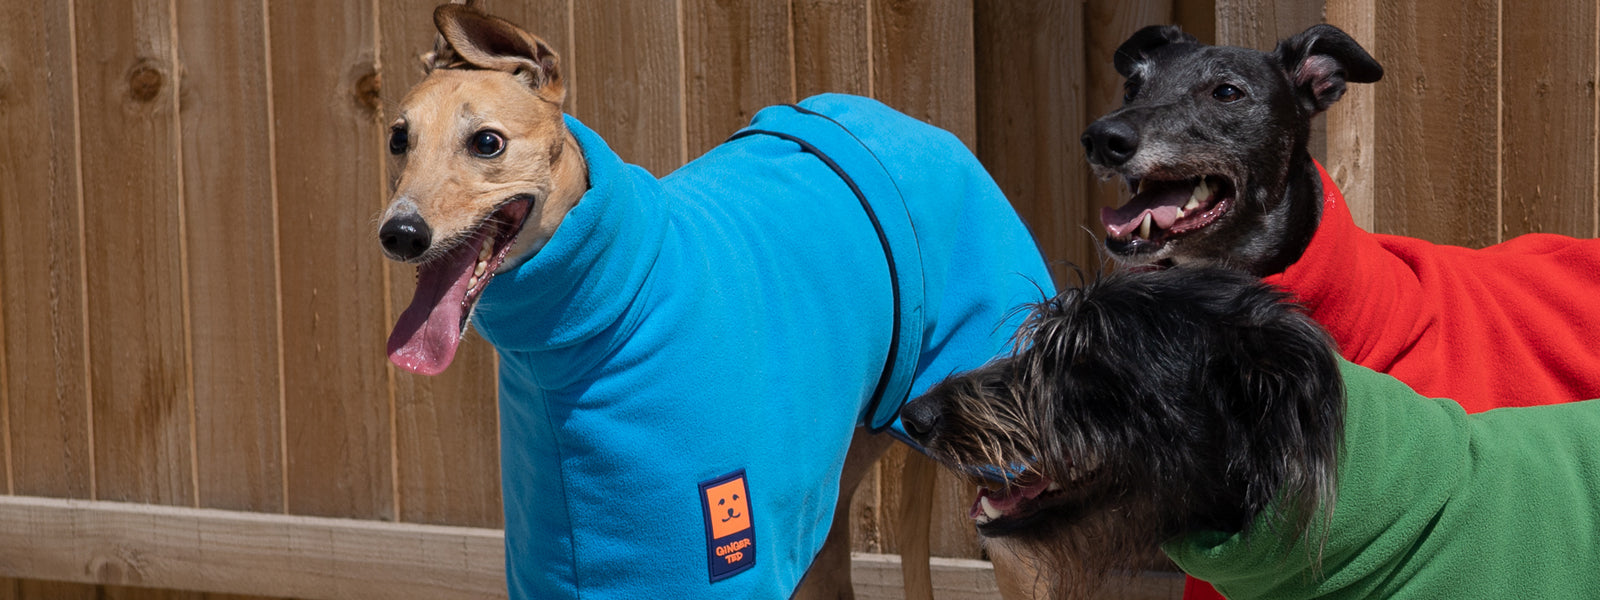 Ginger Ted coats & clothing suitable for Greyhounds, Whippets & Lurchers. Waterproof, lightweight and warm thermal styles